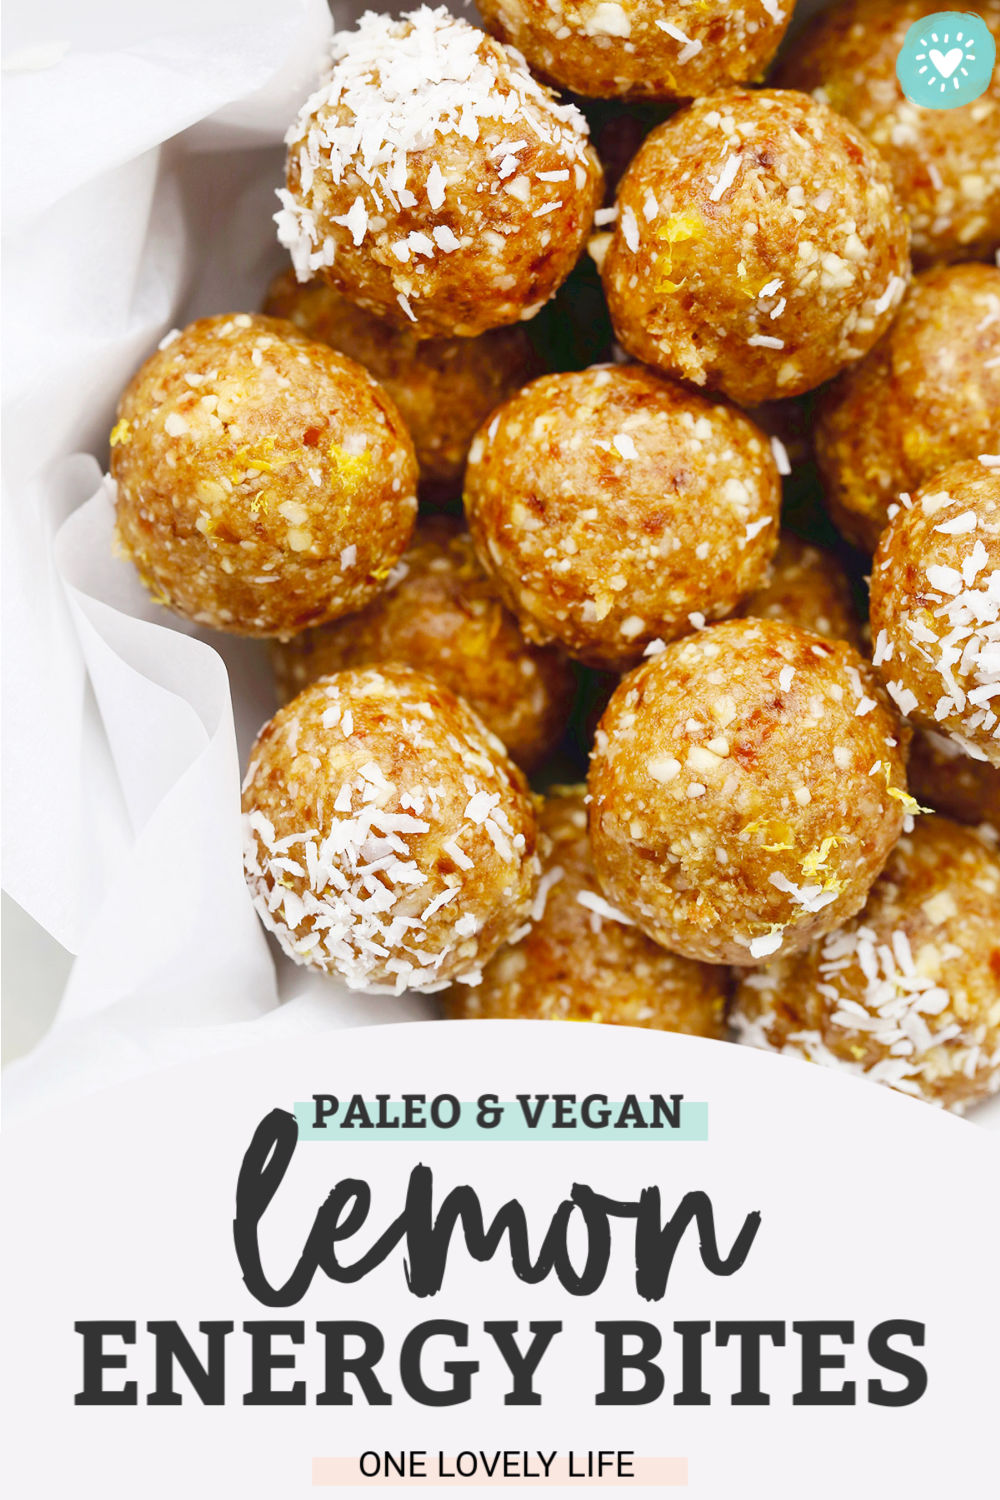 No-Bake Lemon Energy Bites - These tasty lemon energy balls make such a yummy snack or healthy treat! They're a hit with kids and grown-ups! (Gluten-Free, Vegan, Paleo) // Energy ball recipe // lemon cheesecake energy bites // healthy snack // meal prep snack // healthy snack ideas // healthy snack recipes // lemon coconut energy bites // lemon coconut energy balls // paleo energy bites // whole30 snack // whole30 recipe